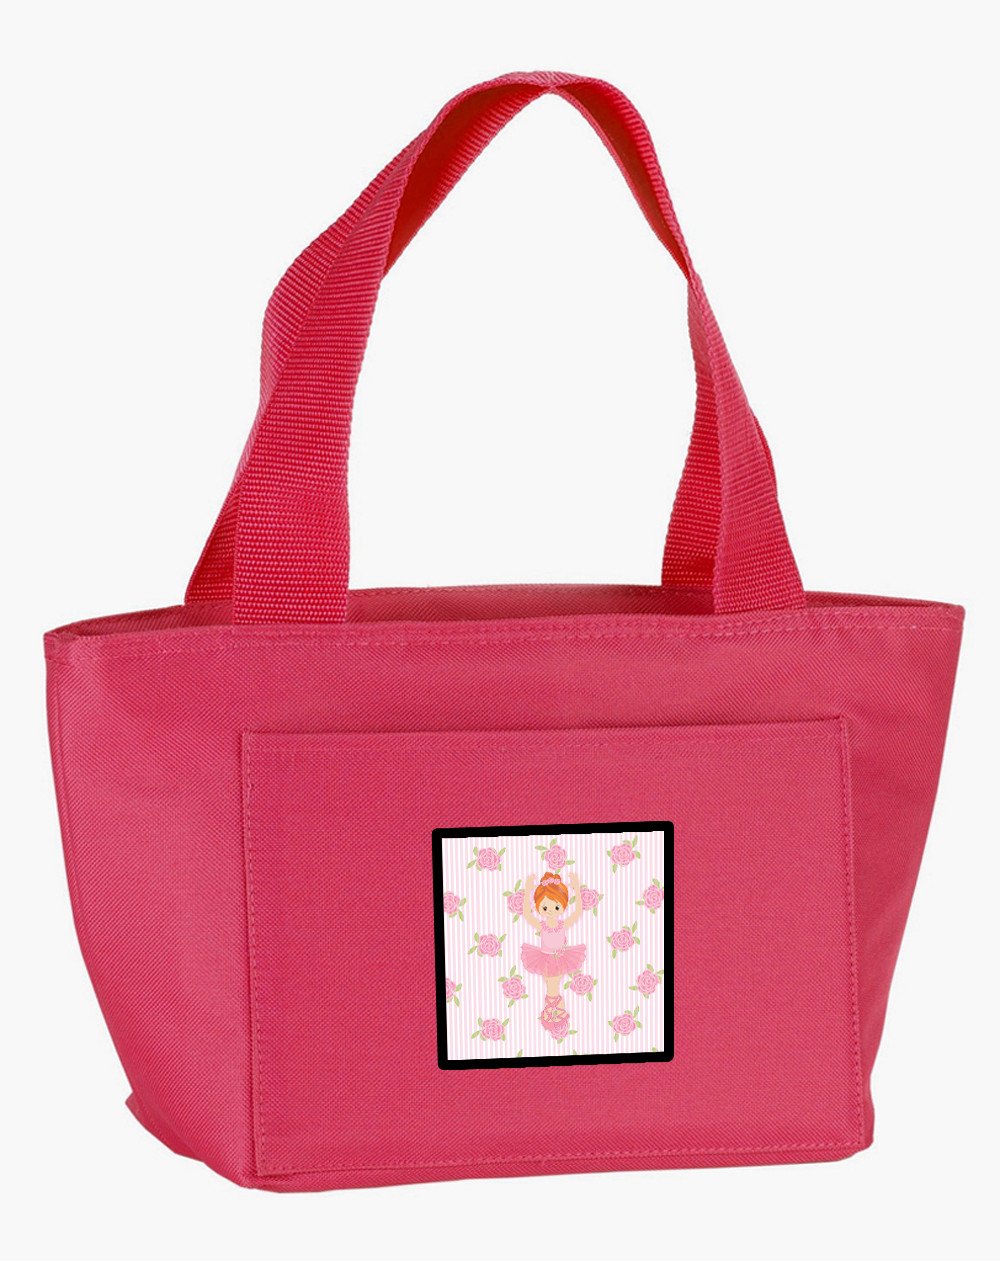 Ballerina Red Front Pose Lunch Bag BB5169PK-8808